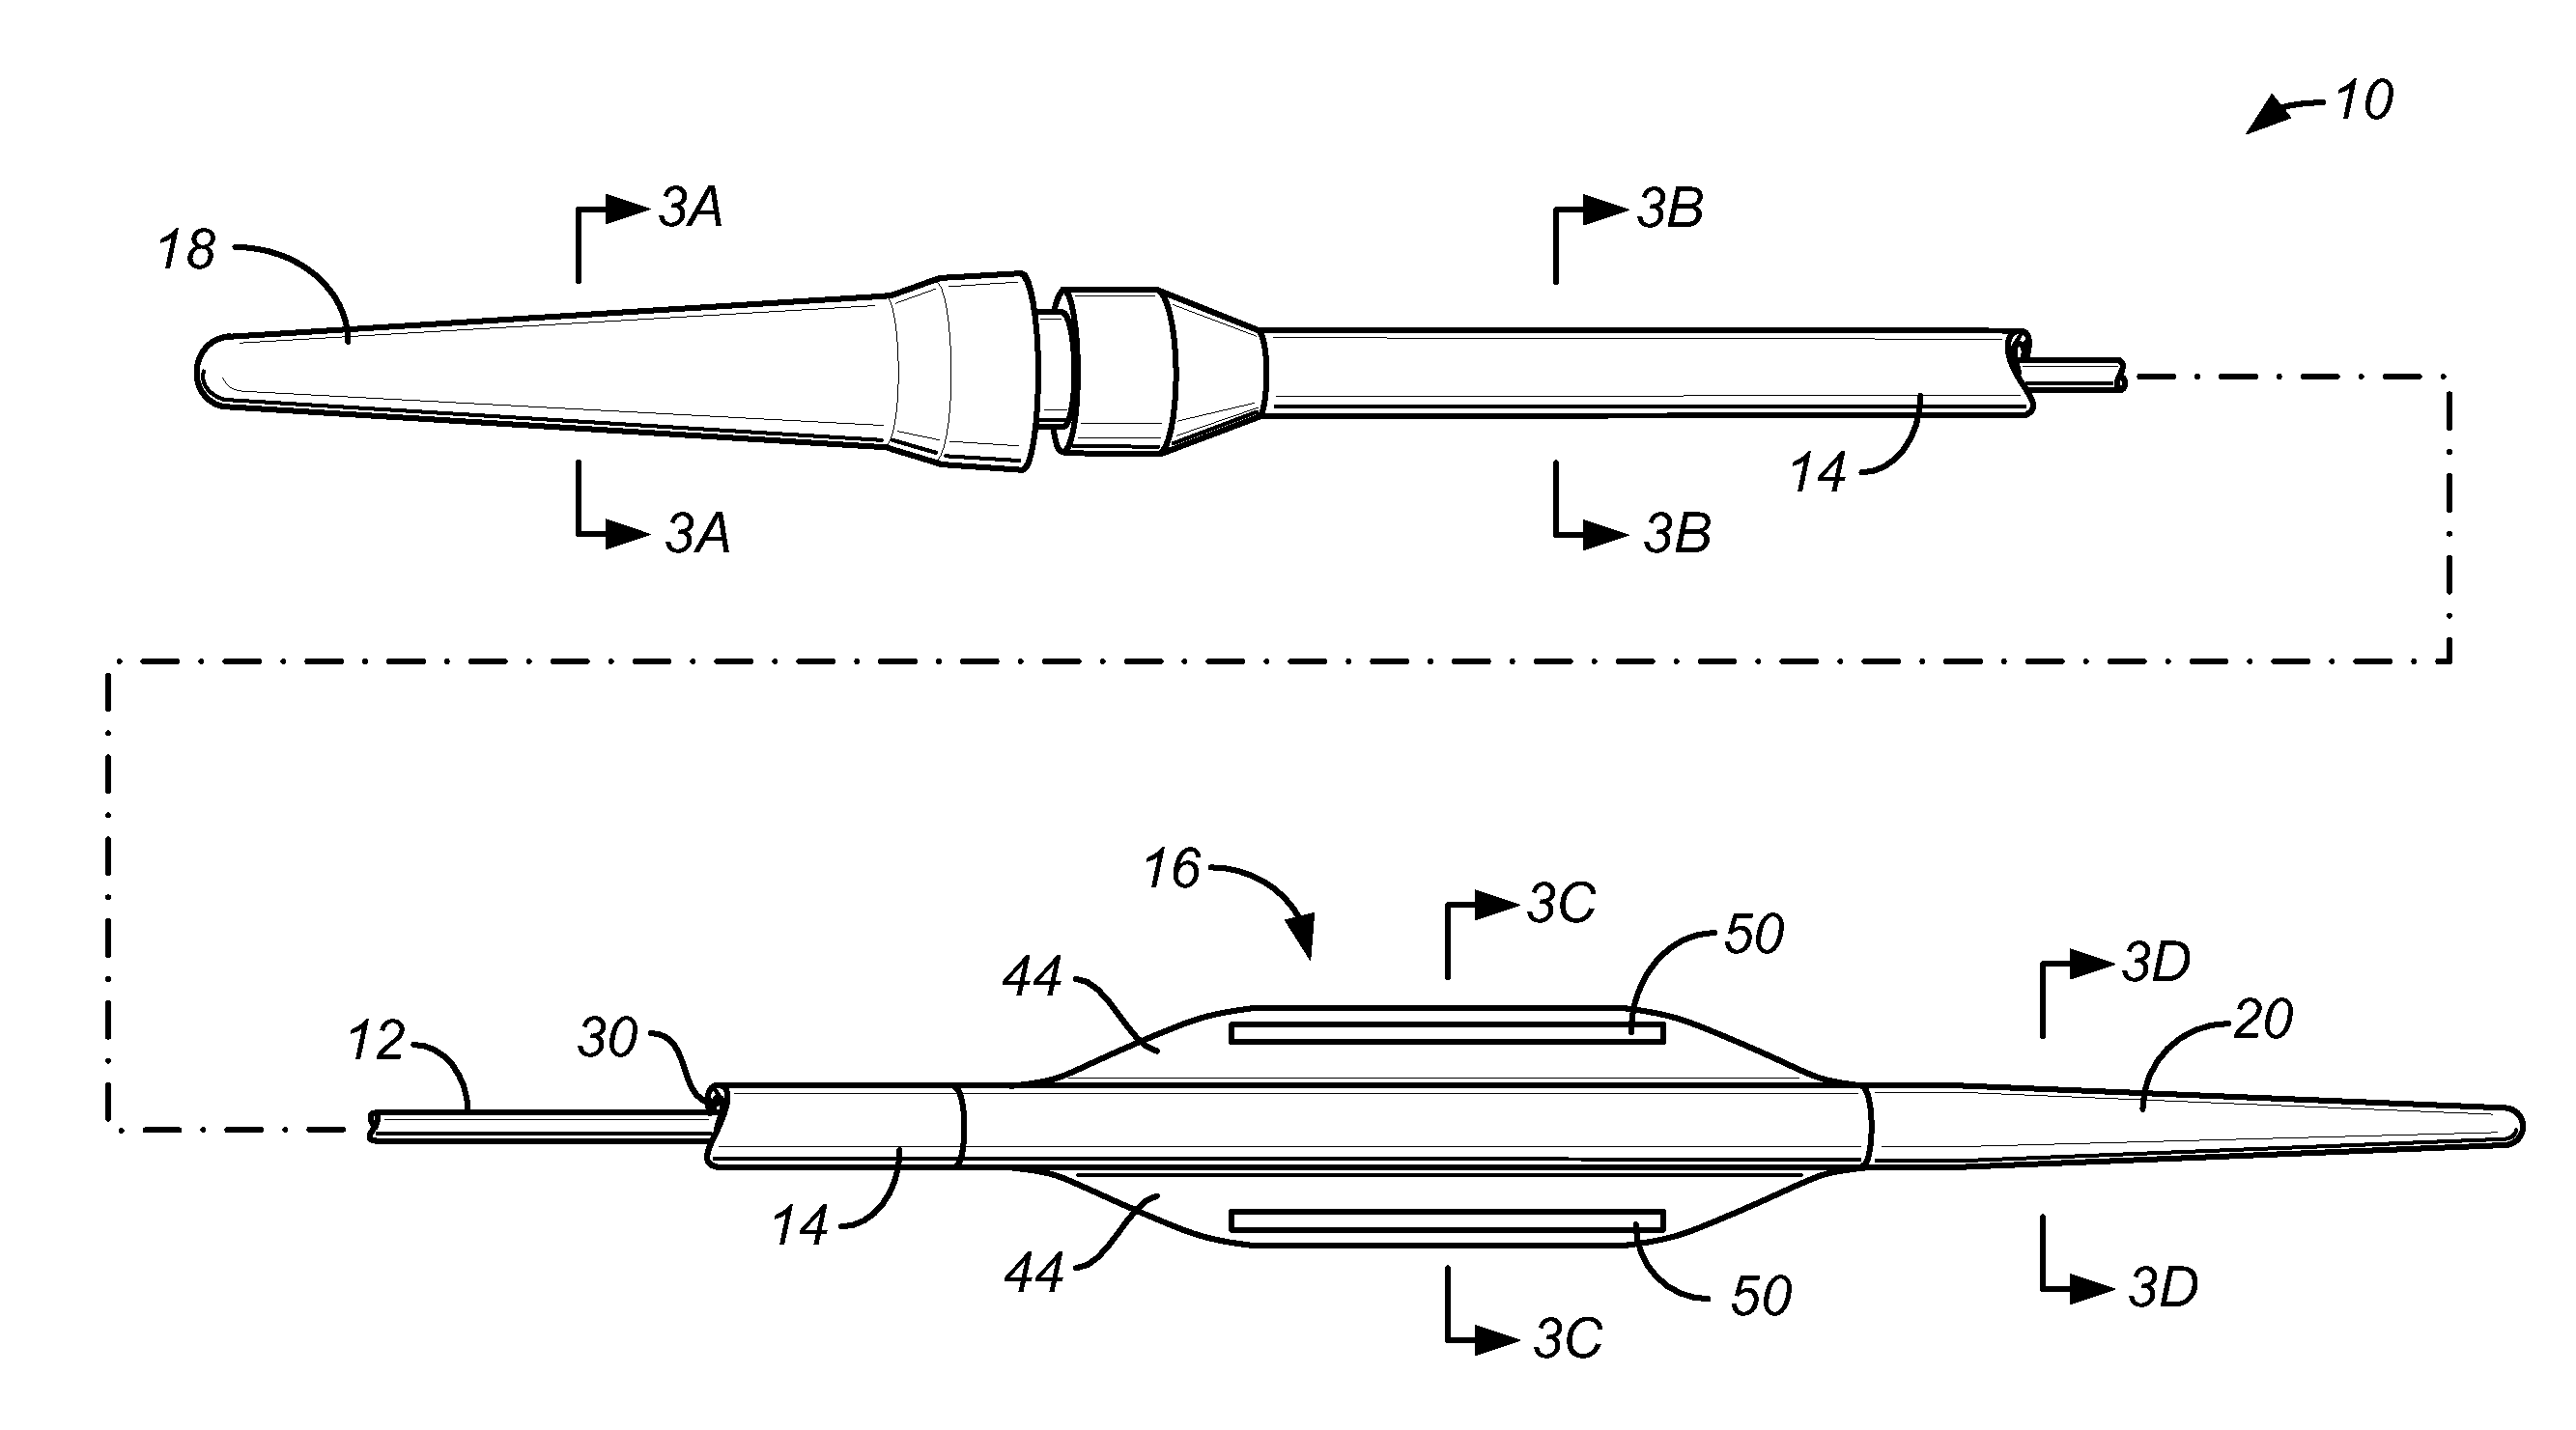 Apparatus for occluding body lumens